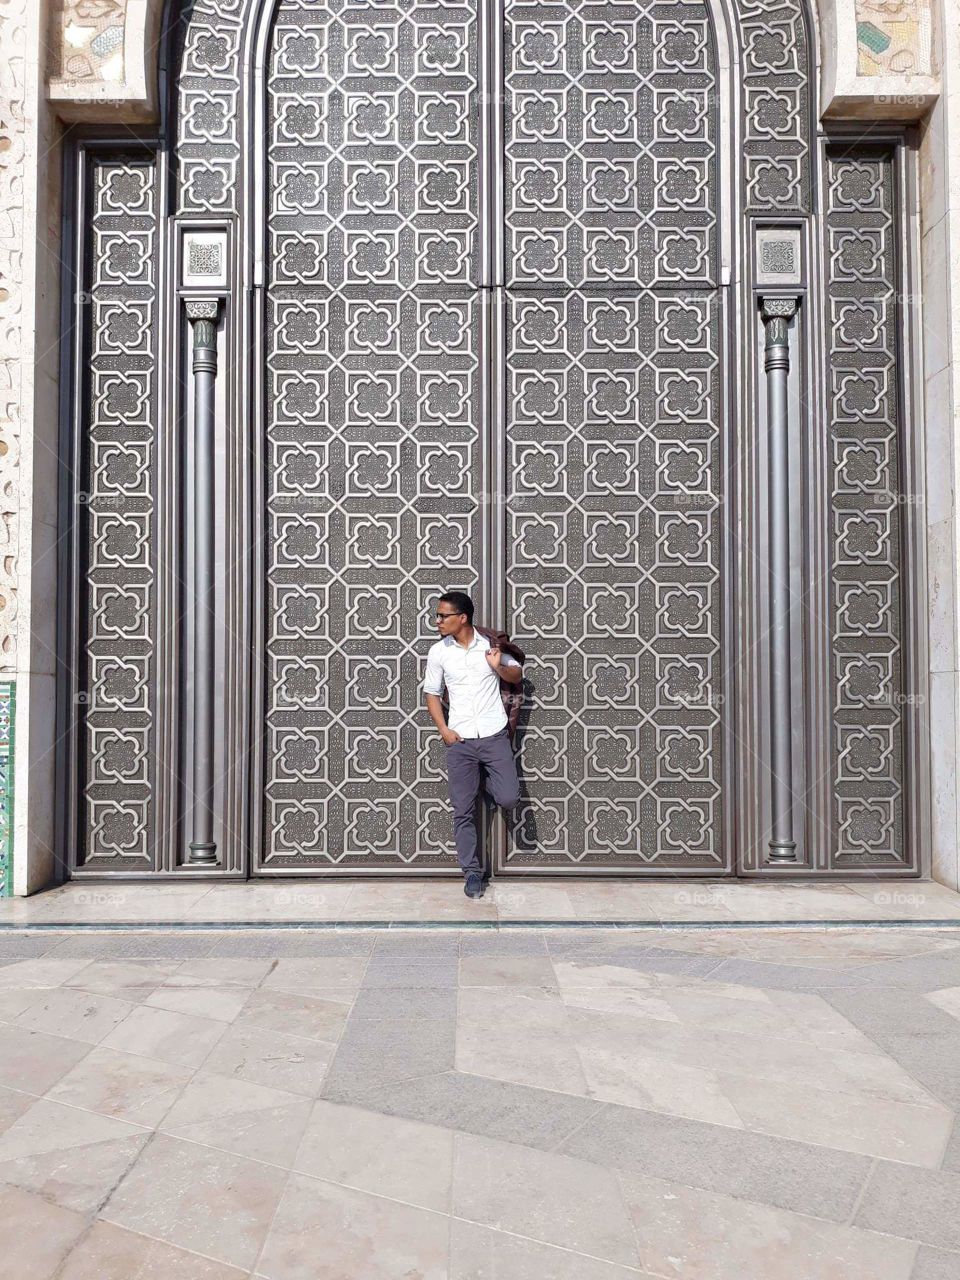 I am standing at one of the doors of the Hassan II Mosque in Casablanca, Morocco.